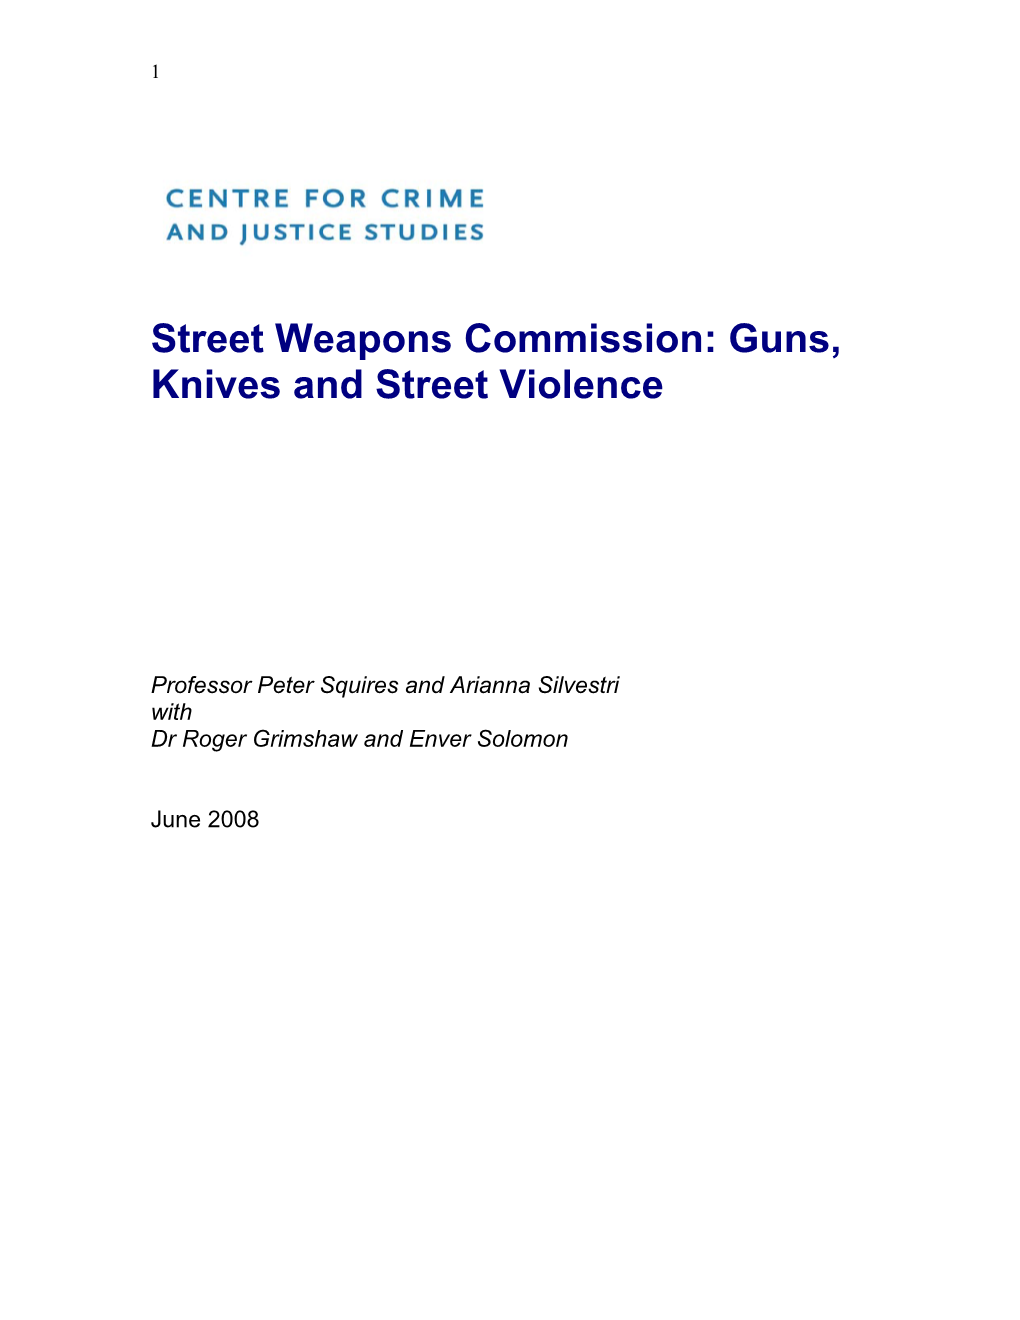 Street Weapons Commission: Guns, Knives and Street Violence